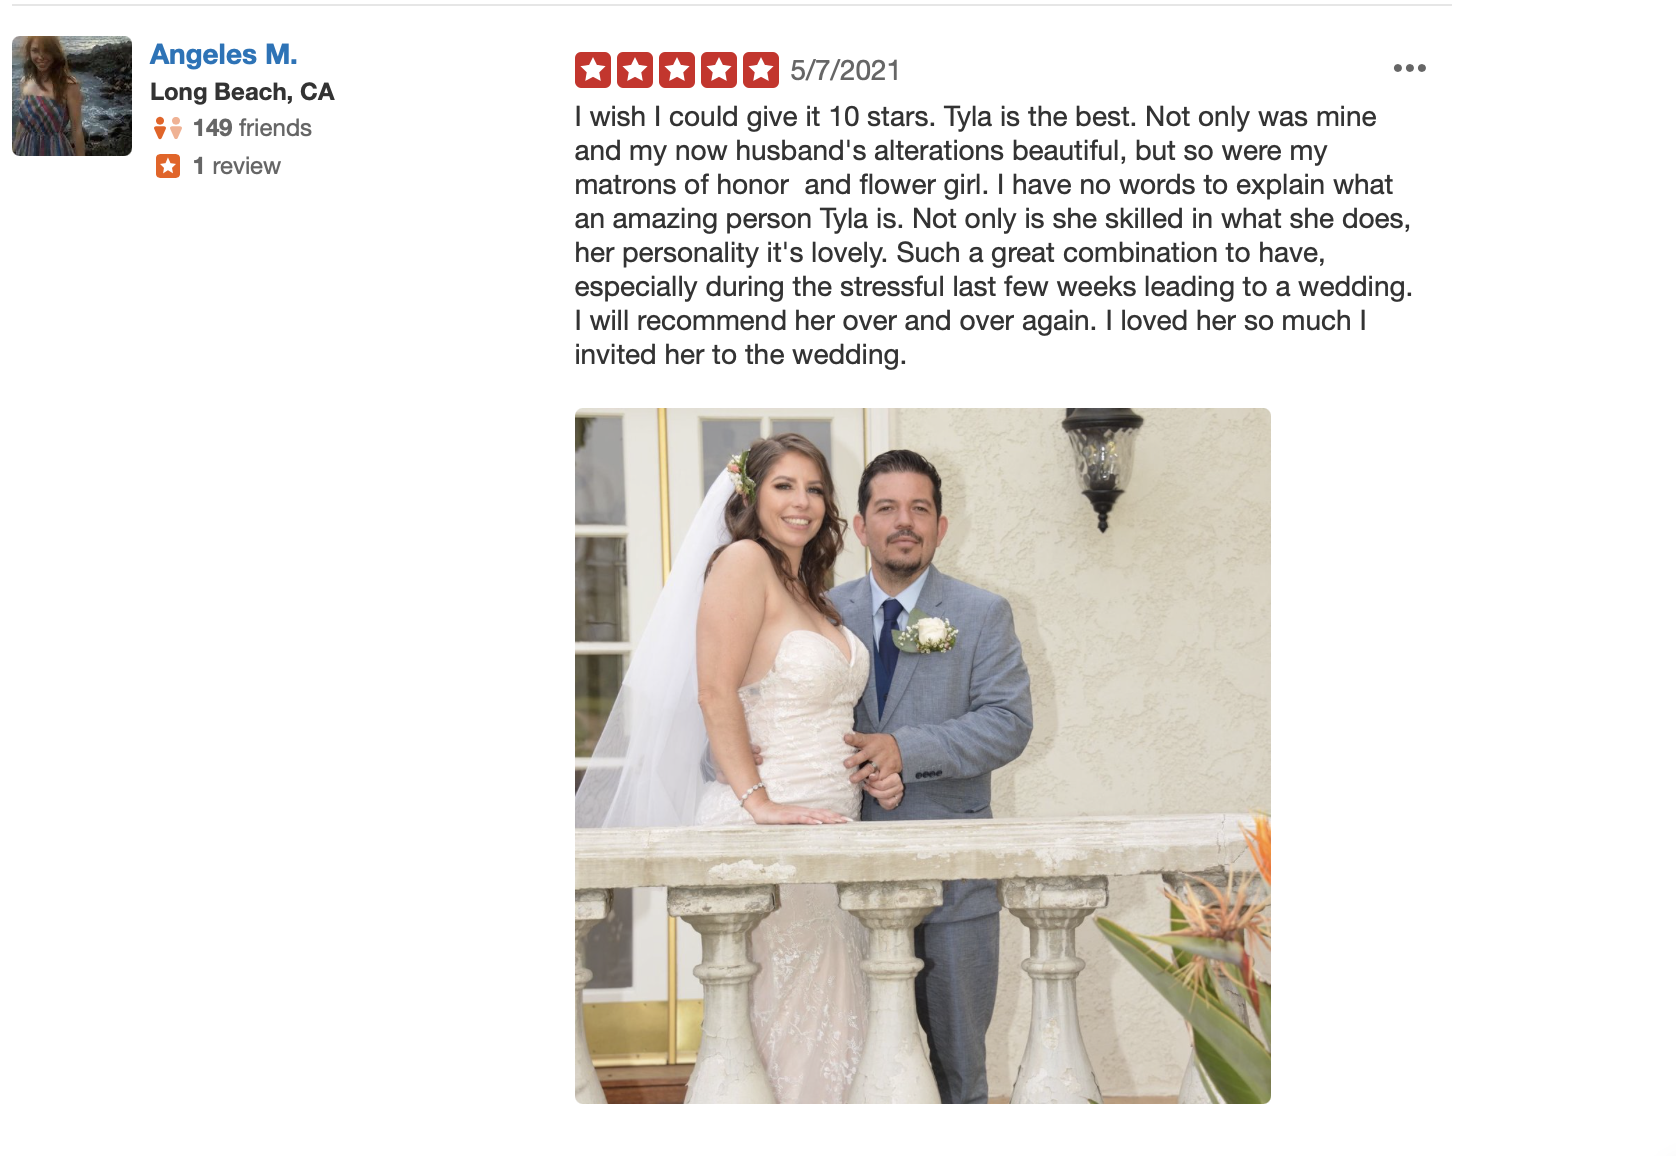 review for tylas bride, from angeles m. " i wish i could give it 10 starts. Tyla is the best. Not only was mine and now husband's alterations beautiful, but so were my maid of honor and flower girl. I have no words to explain what an amazing person tyla is. Not only is she skilled in what she does, her personality  is lovely. Such a great combination to have, especially during the stressful last few weeks leading to the wedding. i will recommend her over and over again. i loved her so much i invited her to the weeding. 